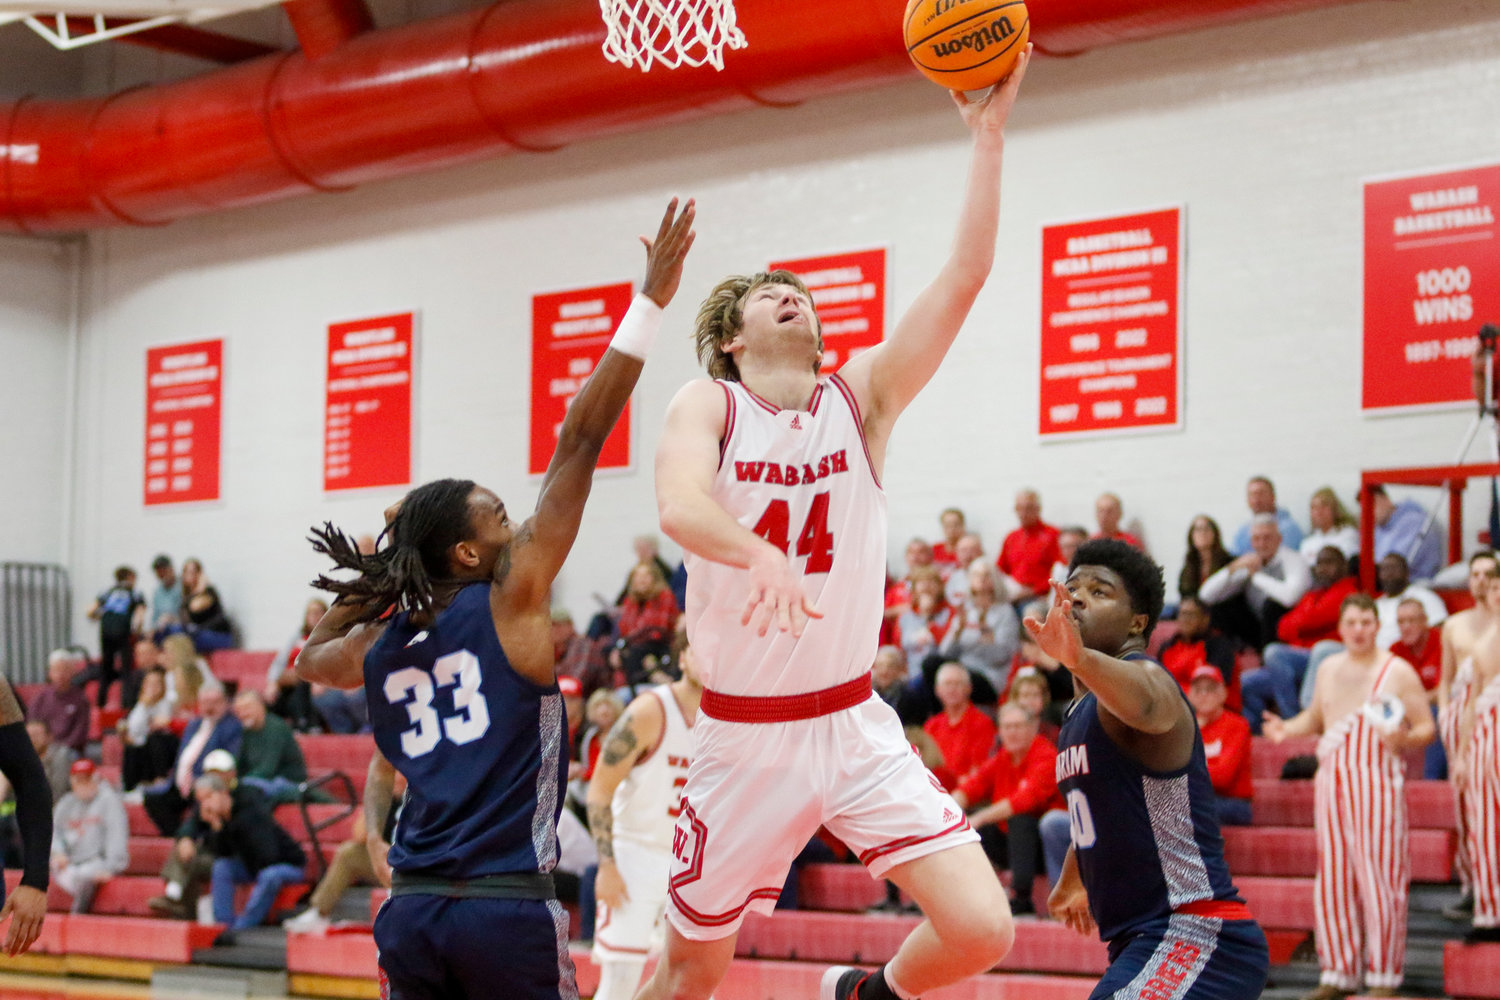 Freshman Gavin Schippert scored a game-high 19 points and grabbed 8 rebounds to lead the Little Giants to a 91-71 win in the opening round of the NCAC Tournament on Tuesday.